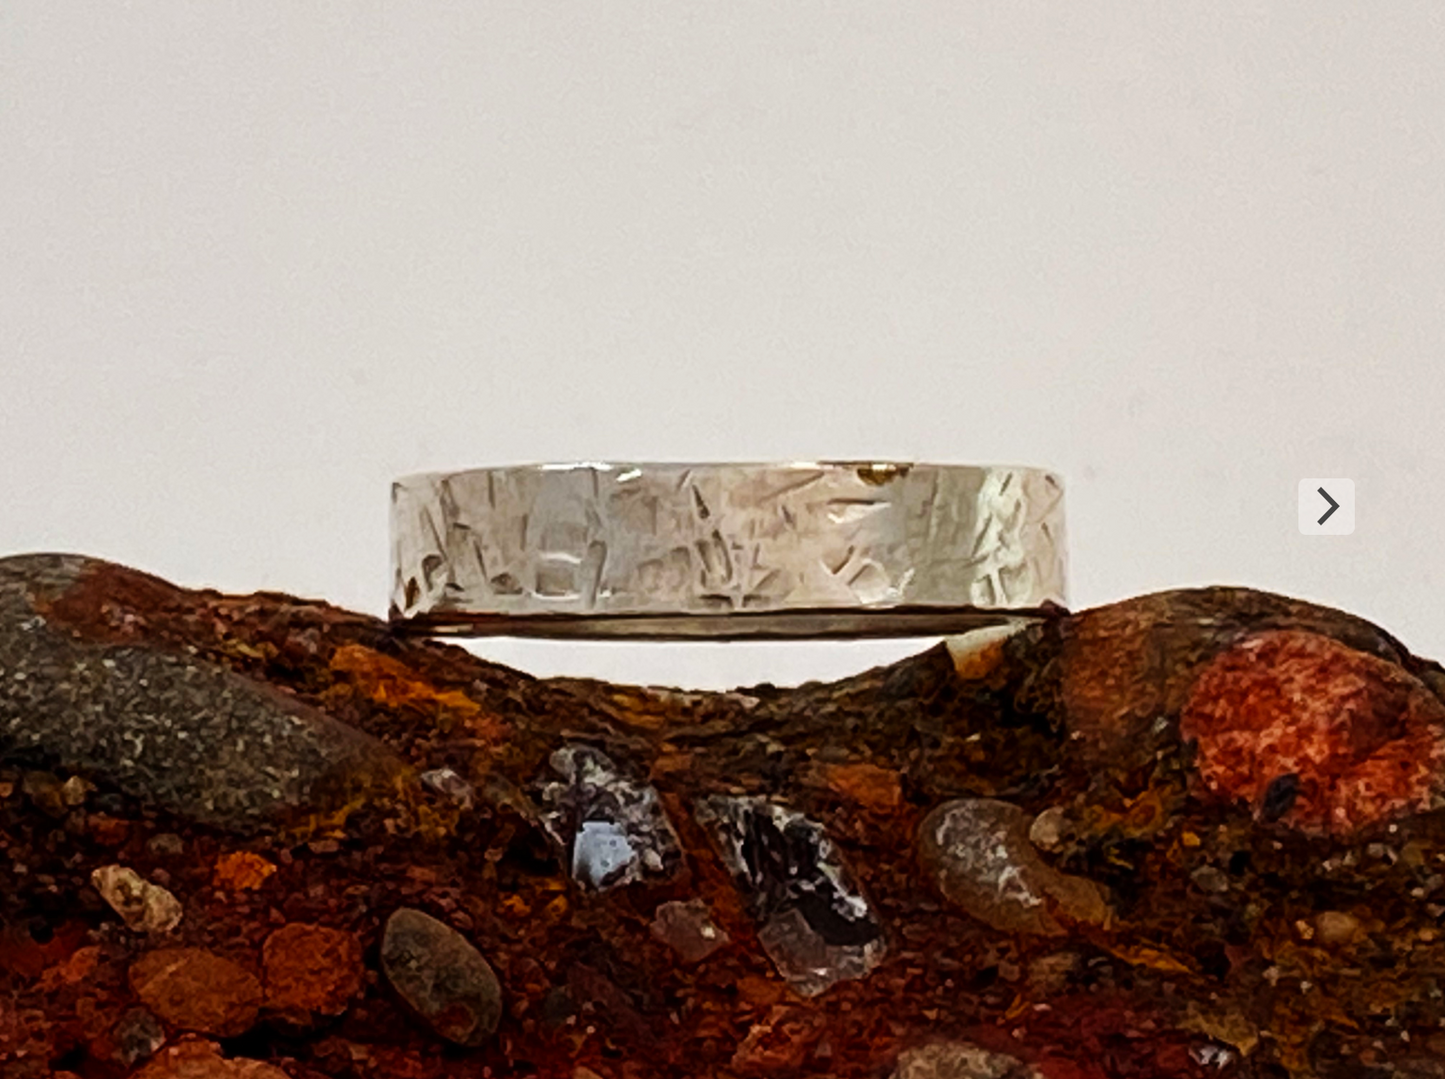 One-of-a-kind hand-crafted ring.  Unique Sterling Silver band is adorned with random stamp patterns Ring size 11-1/2 Style: rustic, boho, funky, organic, earthy yet elegant